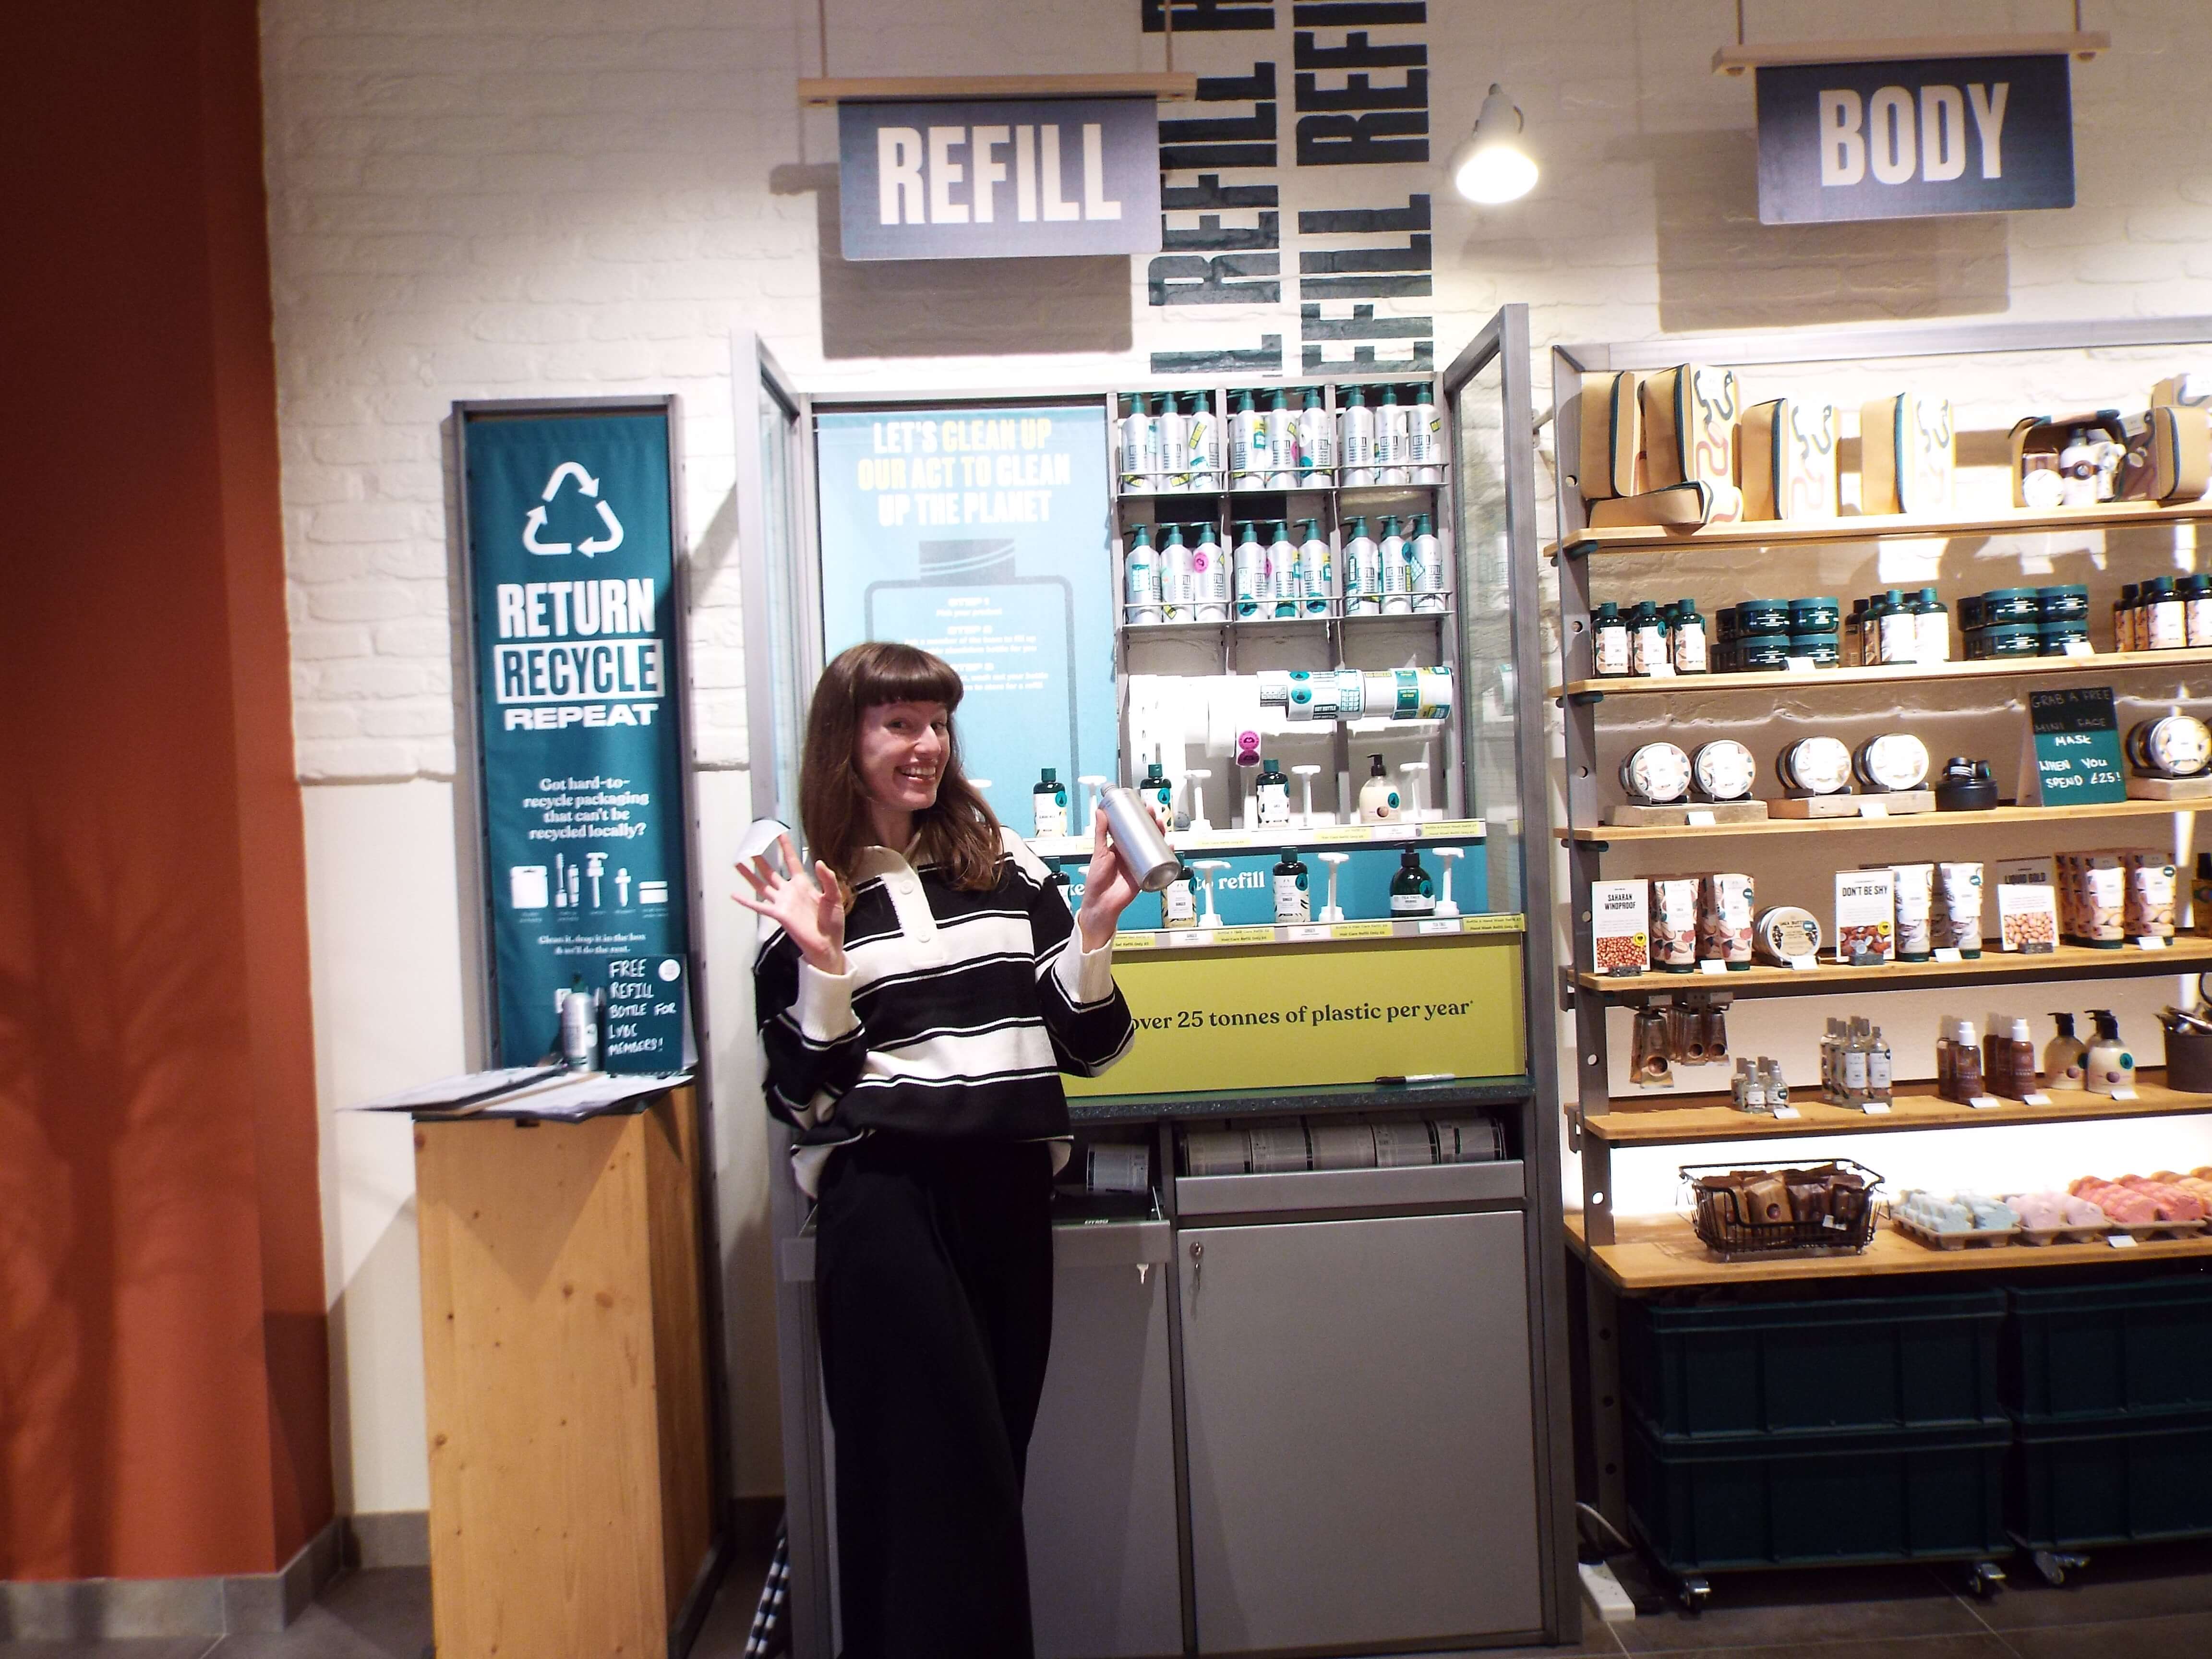 Me smiling, with jazz hands and a refill bottle held up, with a right cheesy grin, at the refill station.